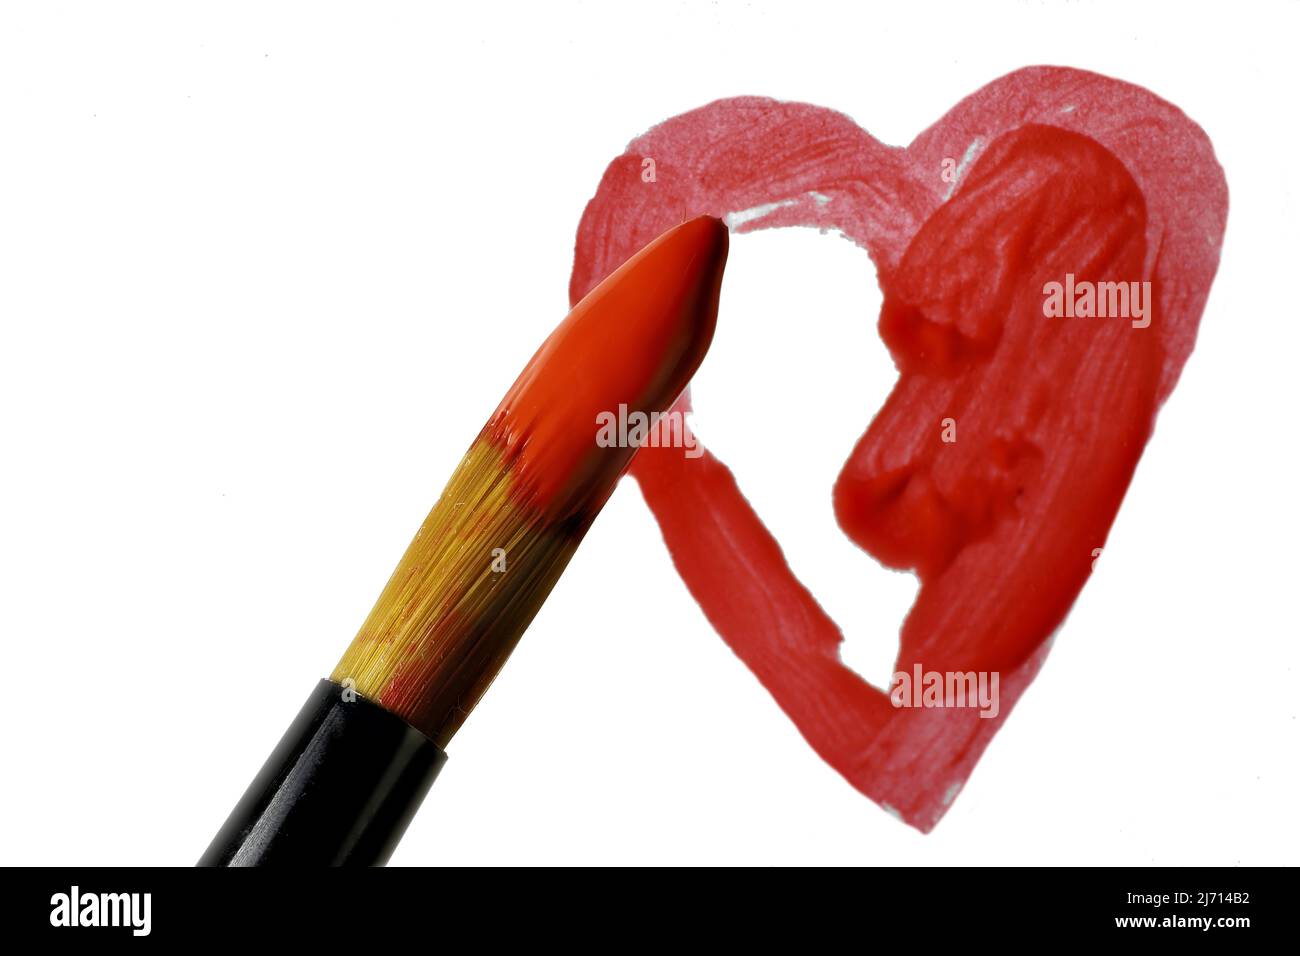 Tip of artist's brush dipped in red acrylic over partially completed painted heart on white background Stock Photo